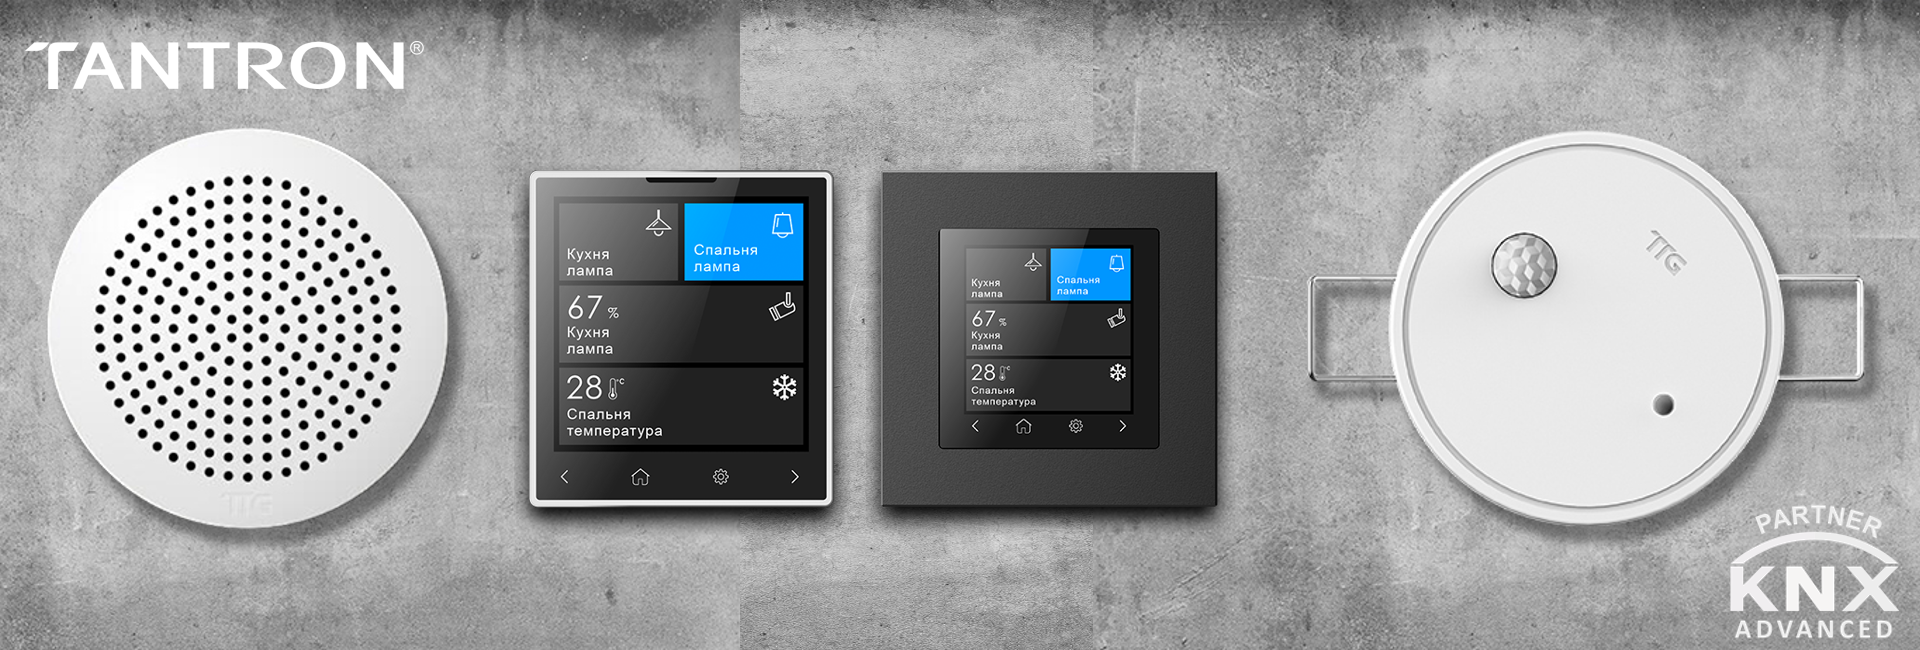 Touch Panel 4" KNX Tantron - DomoEnergyStore